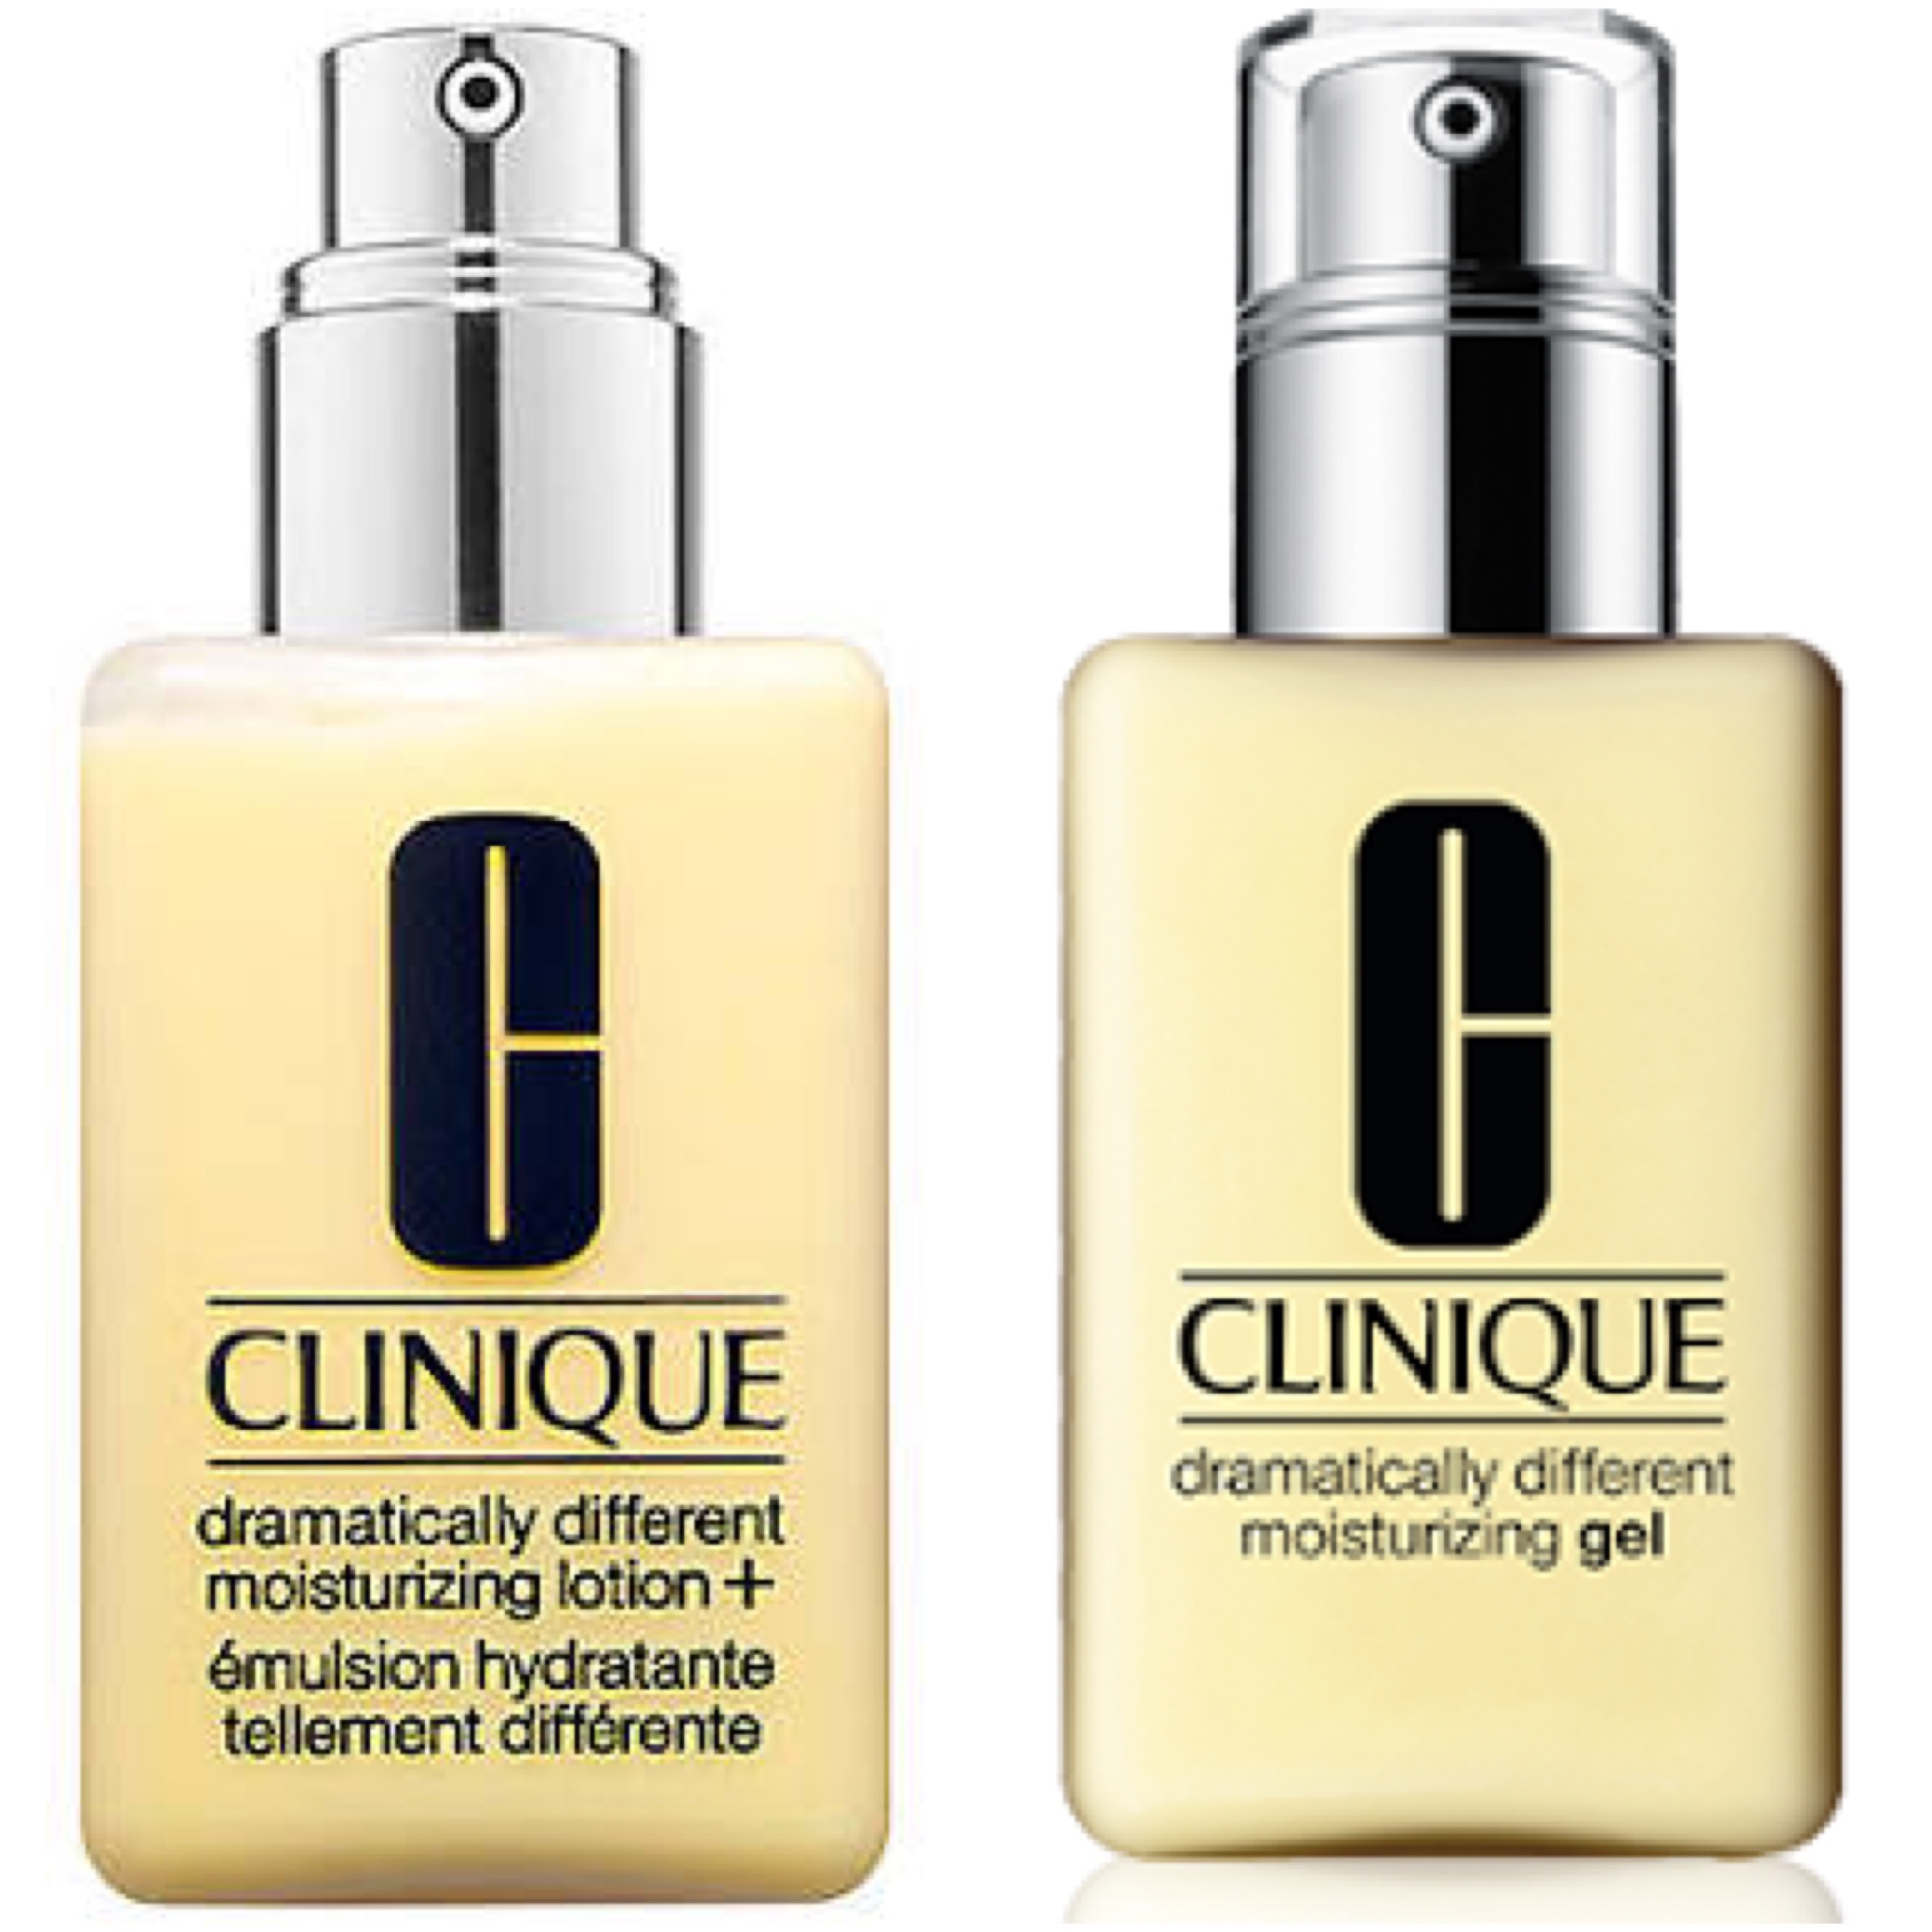 Clinique Lotion is best suited for normal and combination, while Clinique Gel is best for Oily Skin